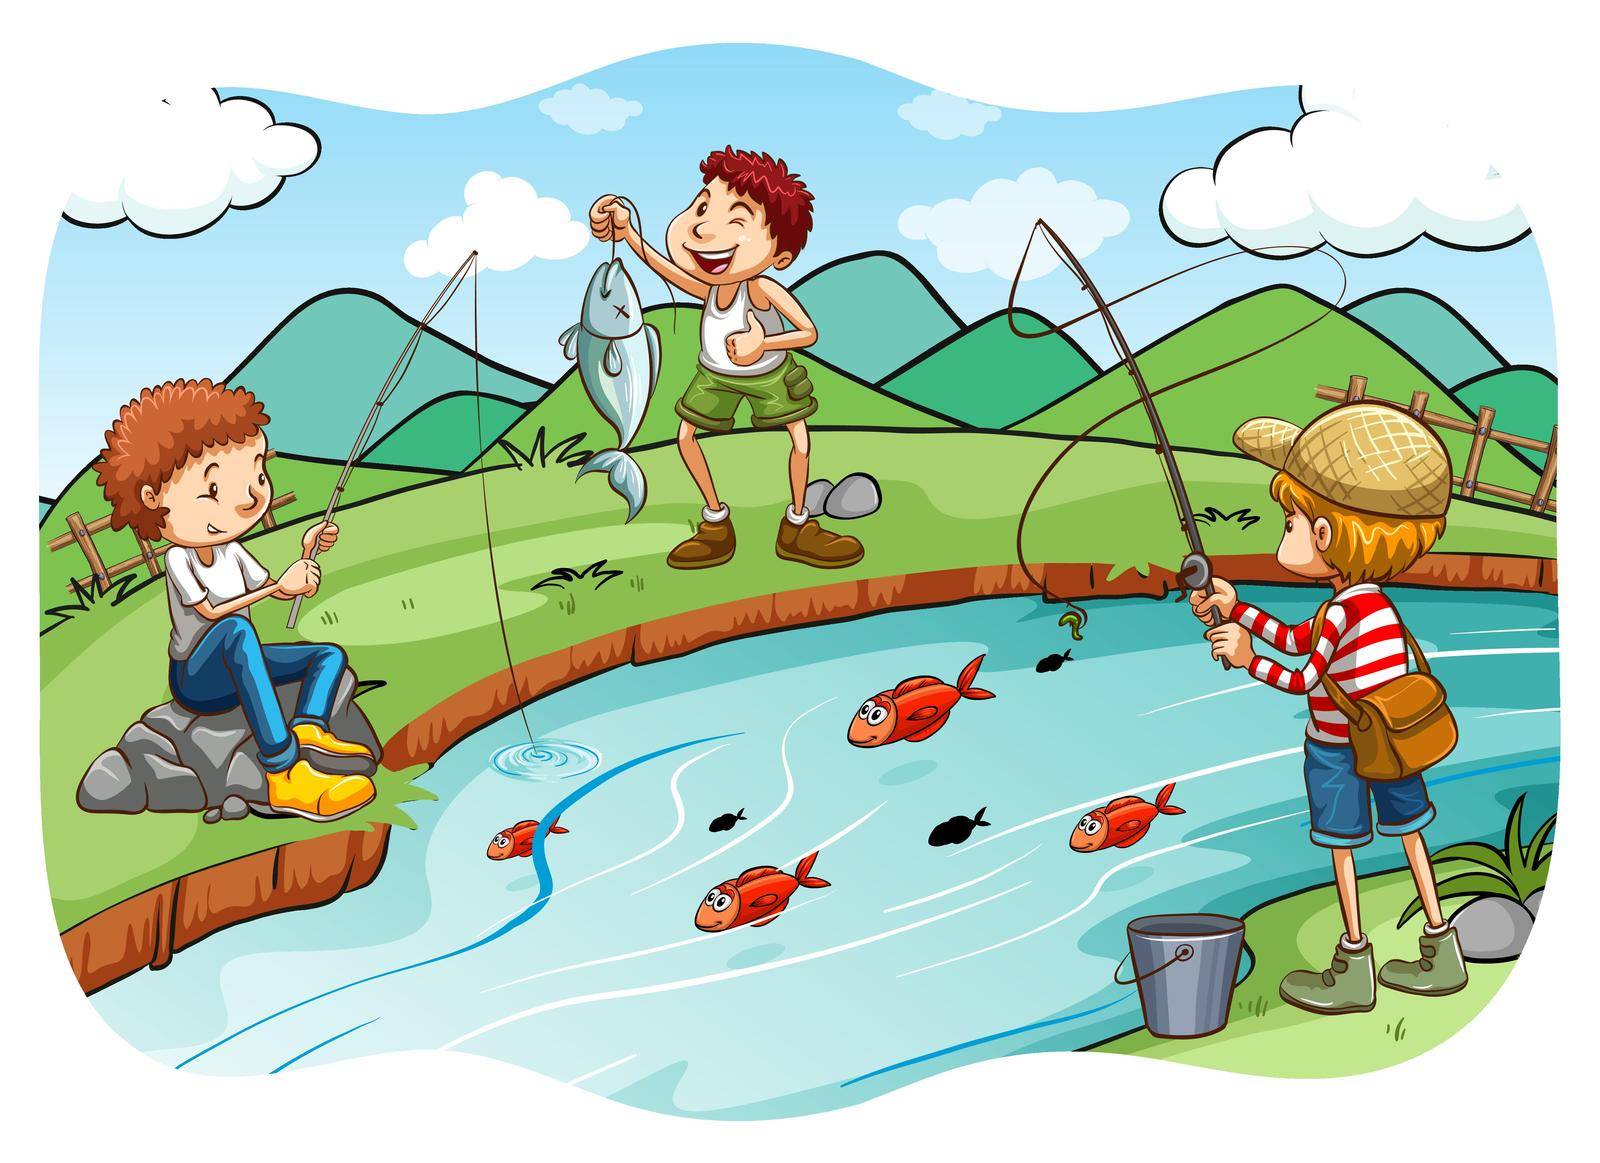 Children fishing at the river